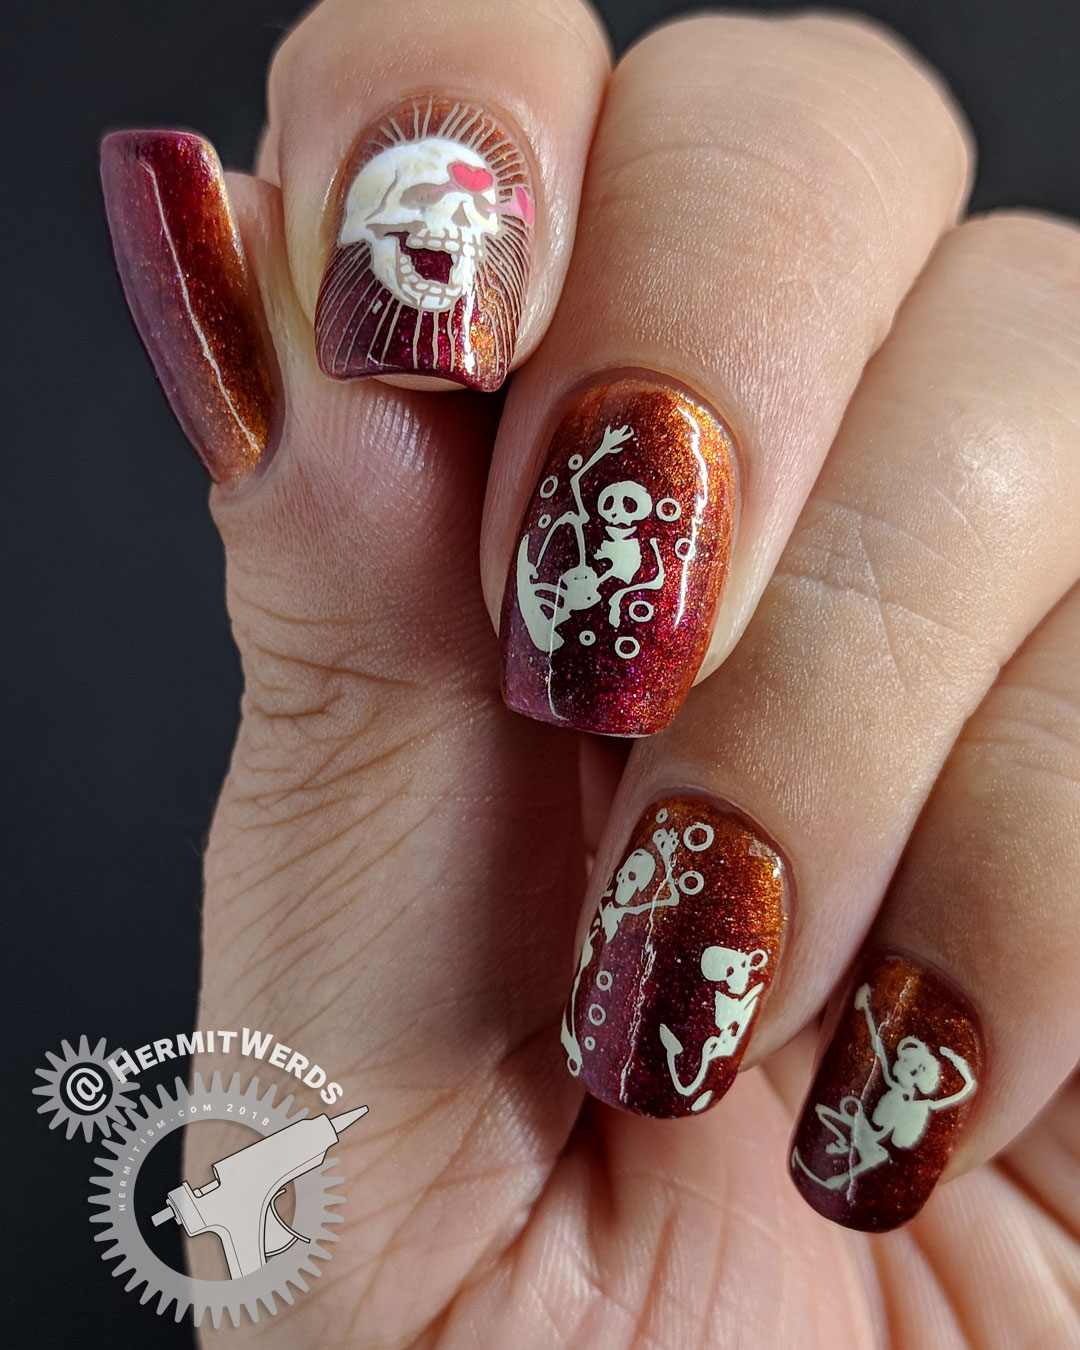 Hunka Hunka Skeleton - Hermit Werds - nail art featuring hunky skeletons showing off for interested skull stamped over a copper and red gradient